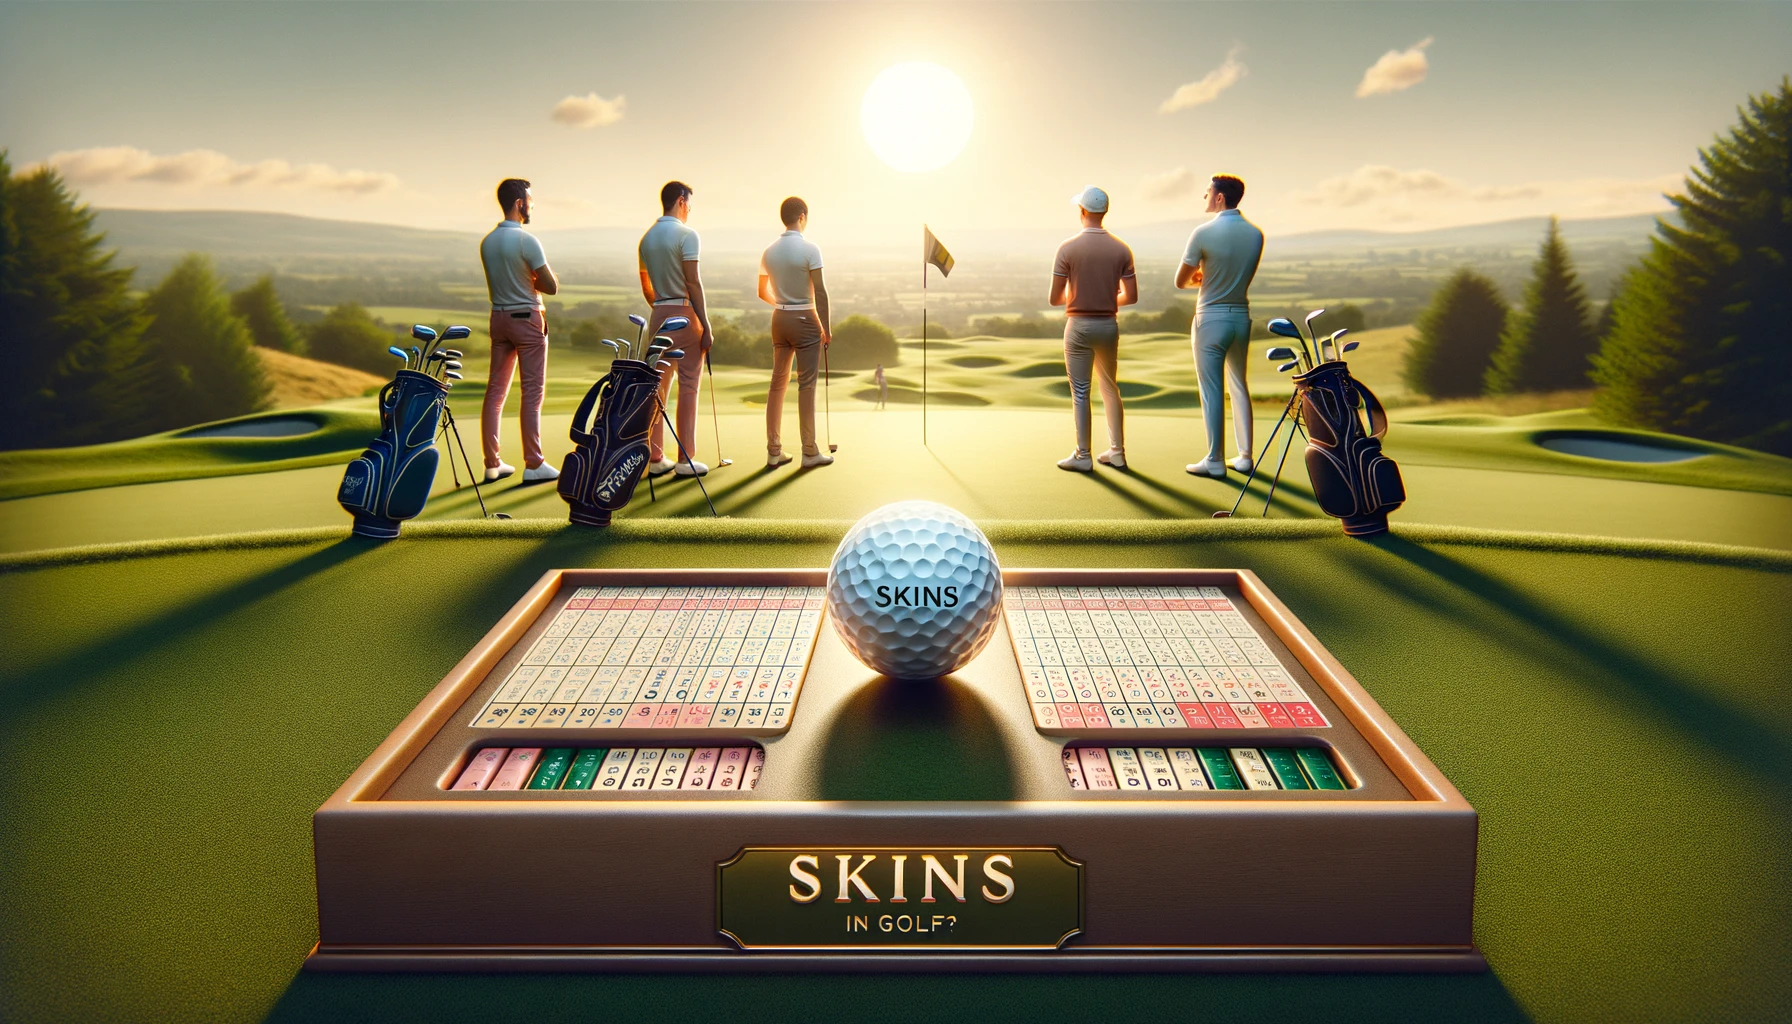 What is Skins in Golf